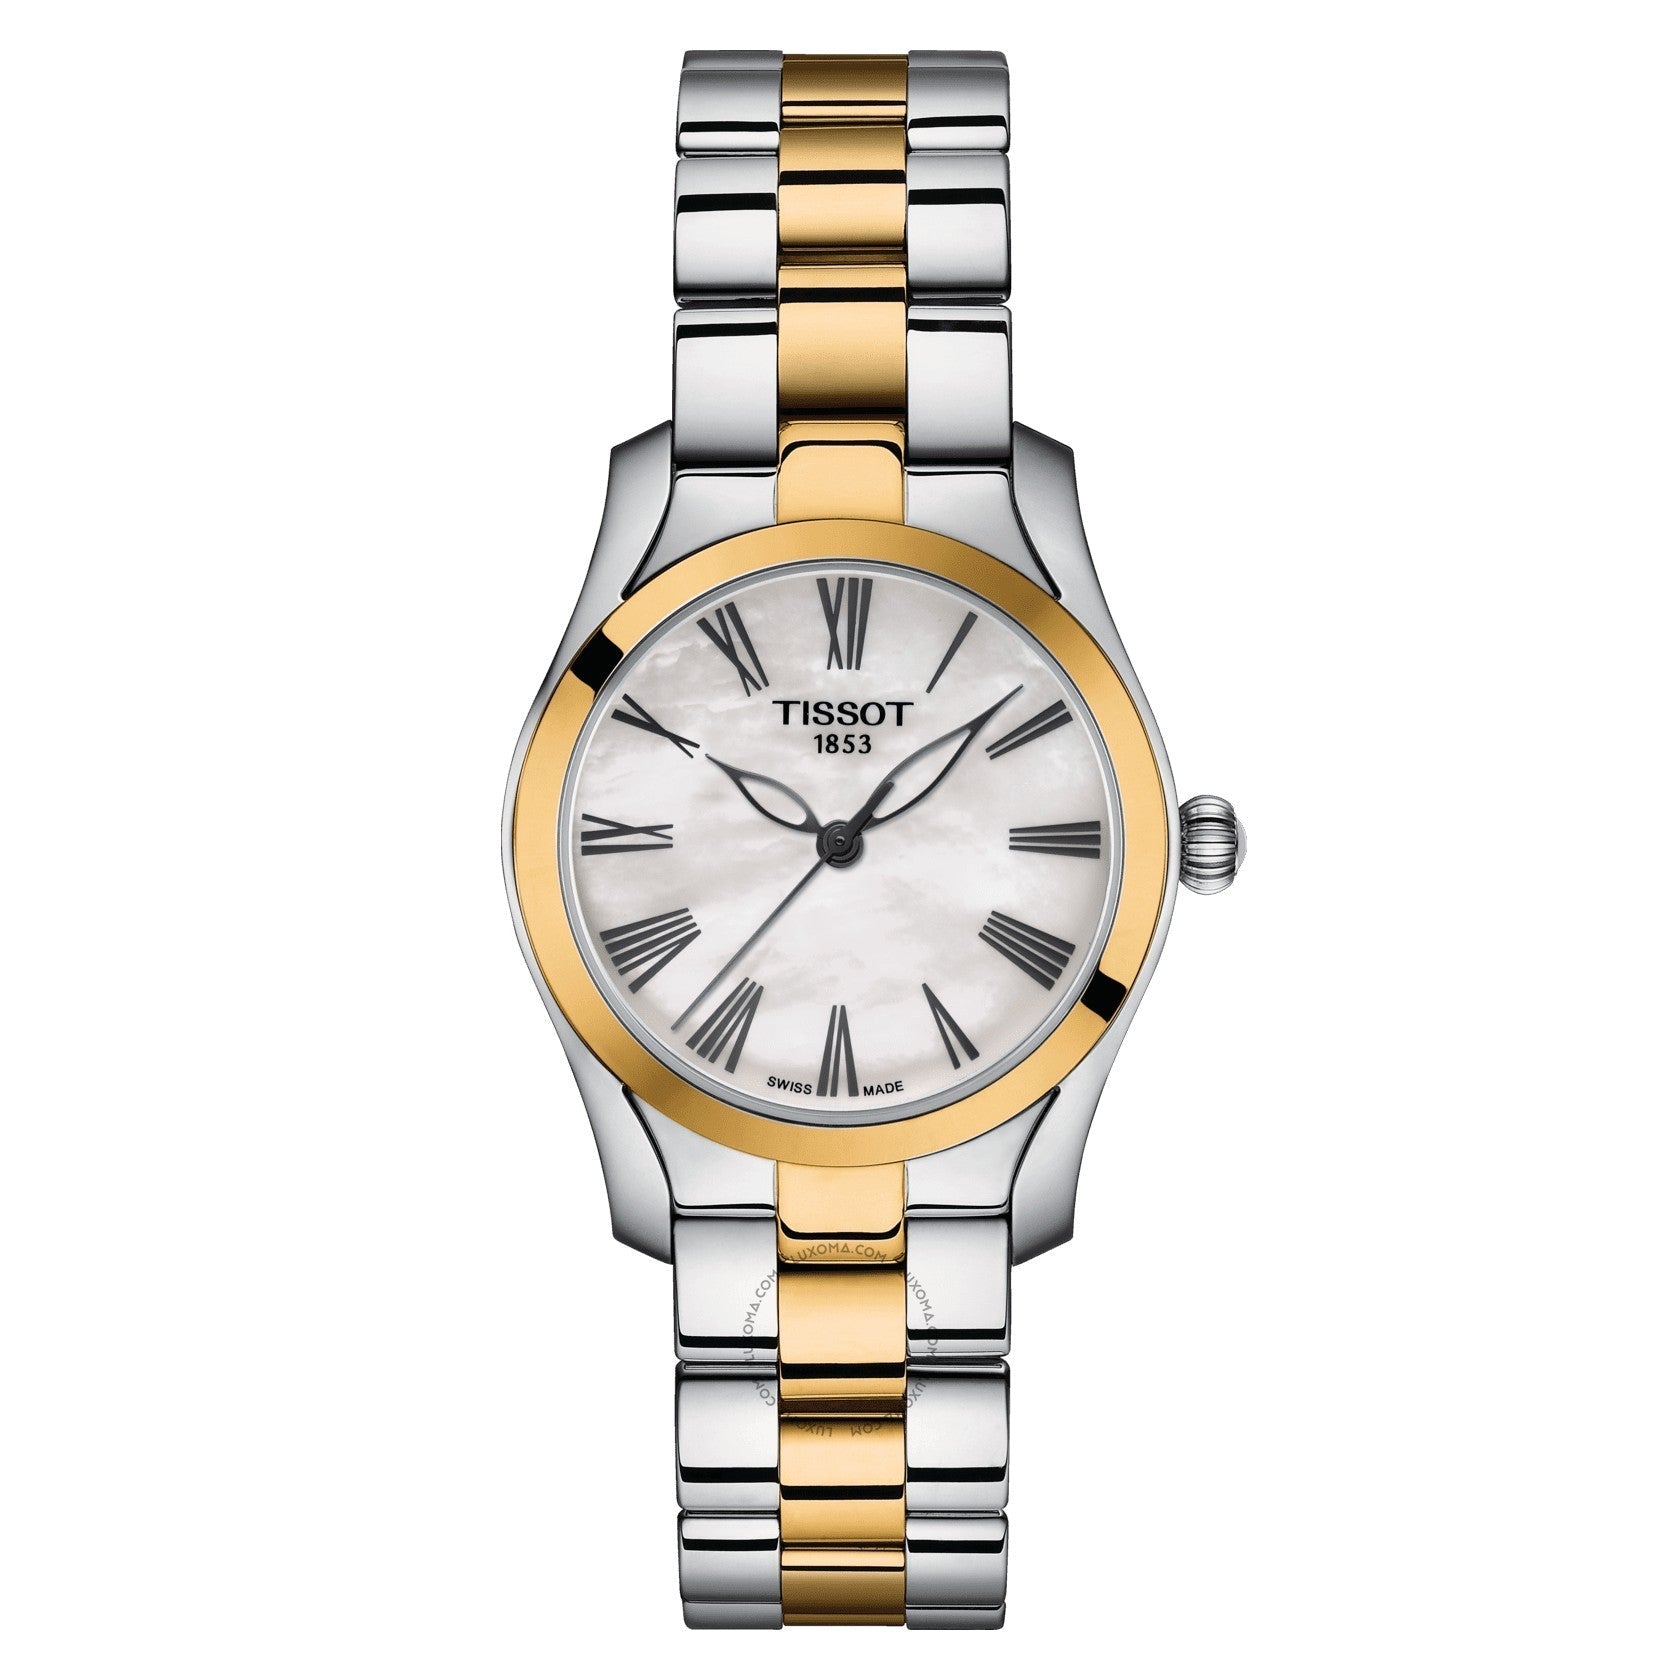 Tissot T-Lady Quartz White Mother-of-Pearl Dial Ladies Watch T112.210.22.113.00